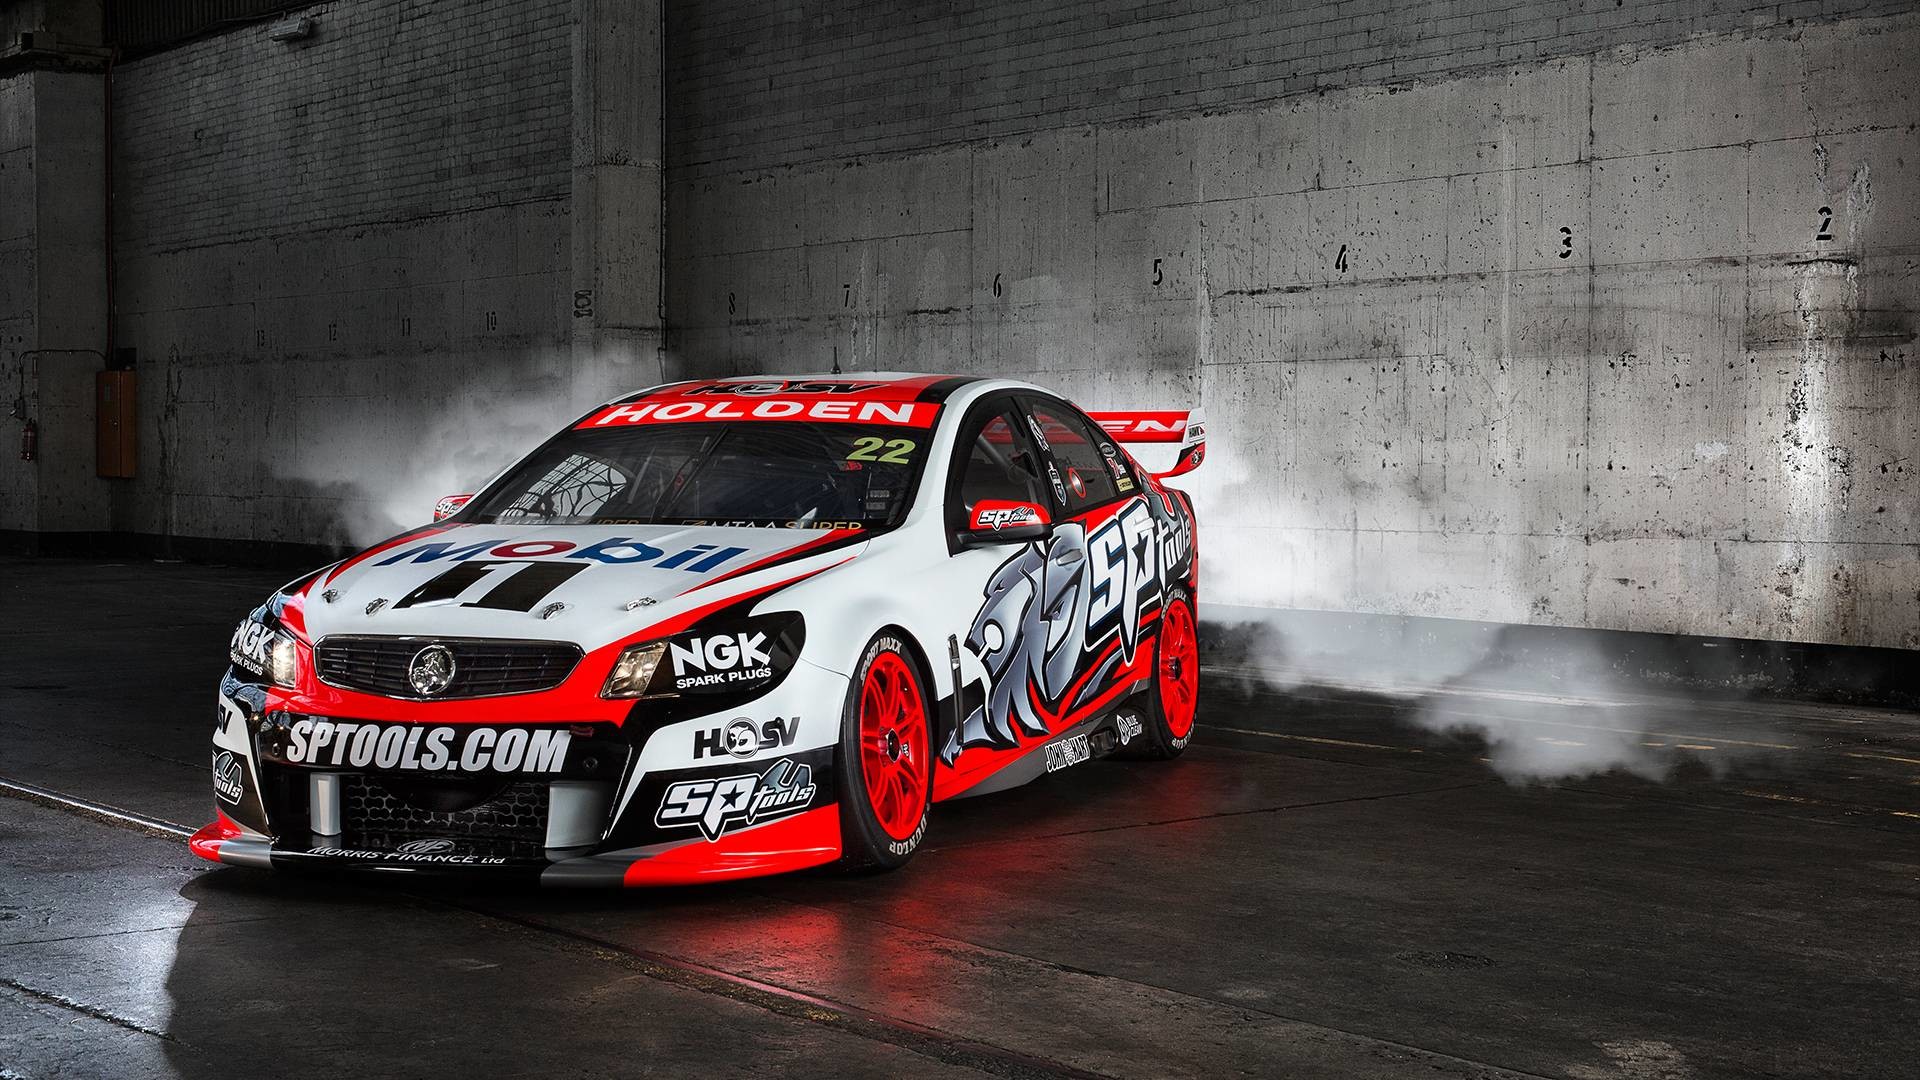 1920x1080 v8 supercars live | Hd Wallpapers